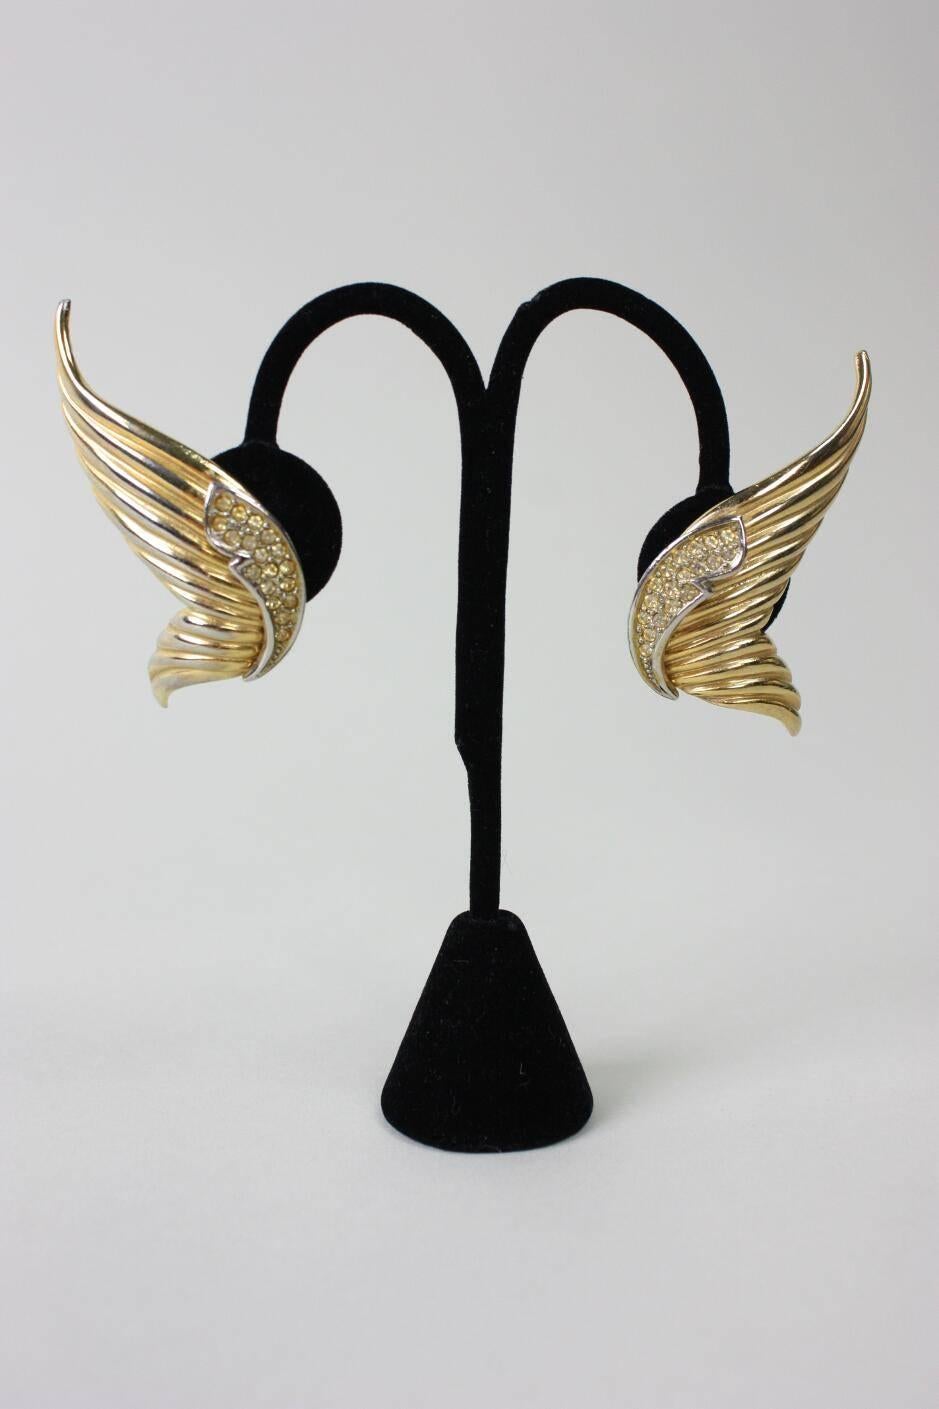 Vintage earrings from Butler & Wilson likely date to the 1980's and are made of gold-toned metal in the shape of wings.  Yellow rhinestone accents at inner ear.  Clip backs. Earrings are stamped B&W.

Measurements-

Length: 2 1/4